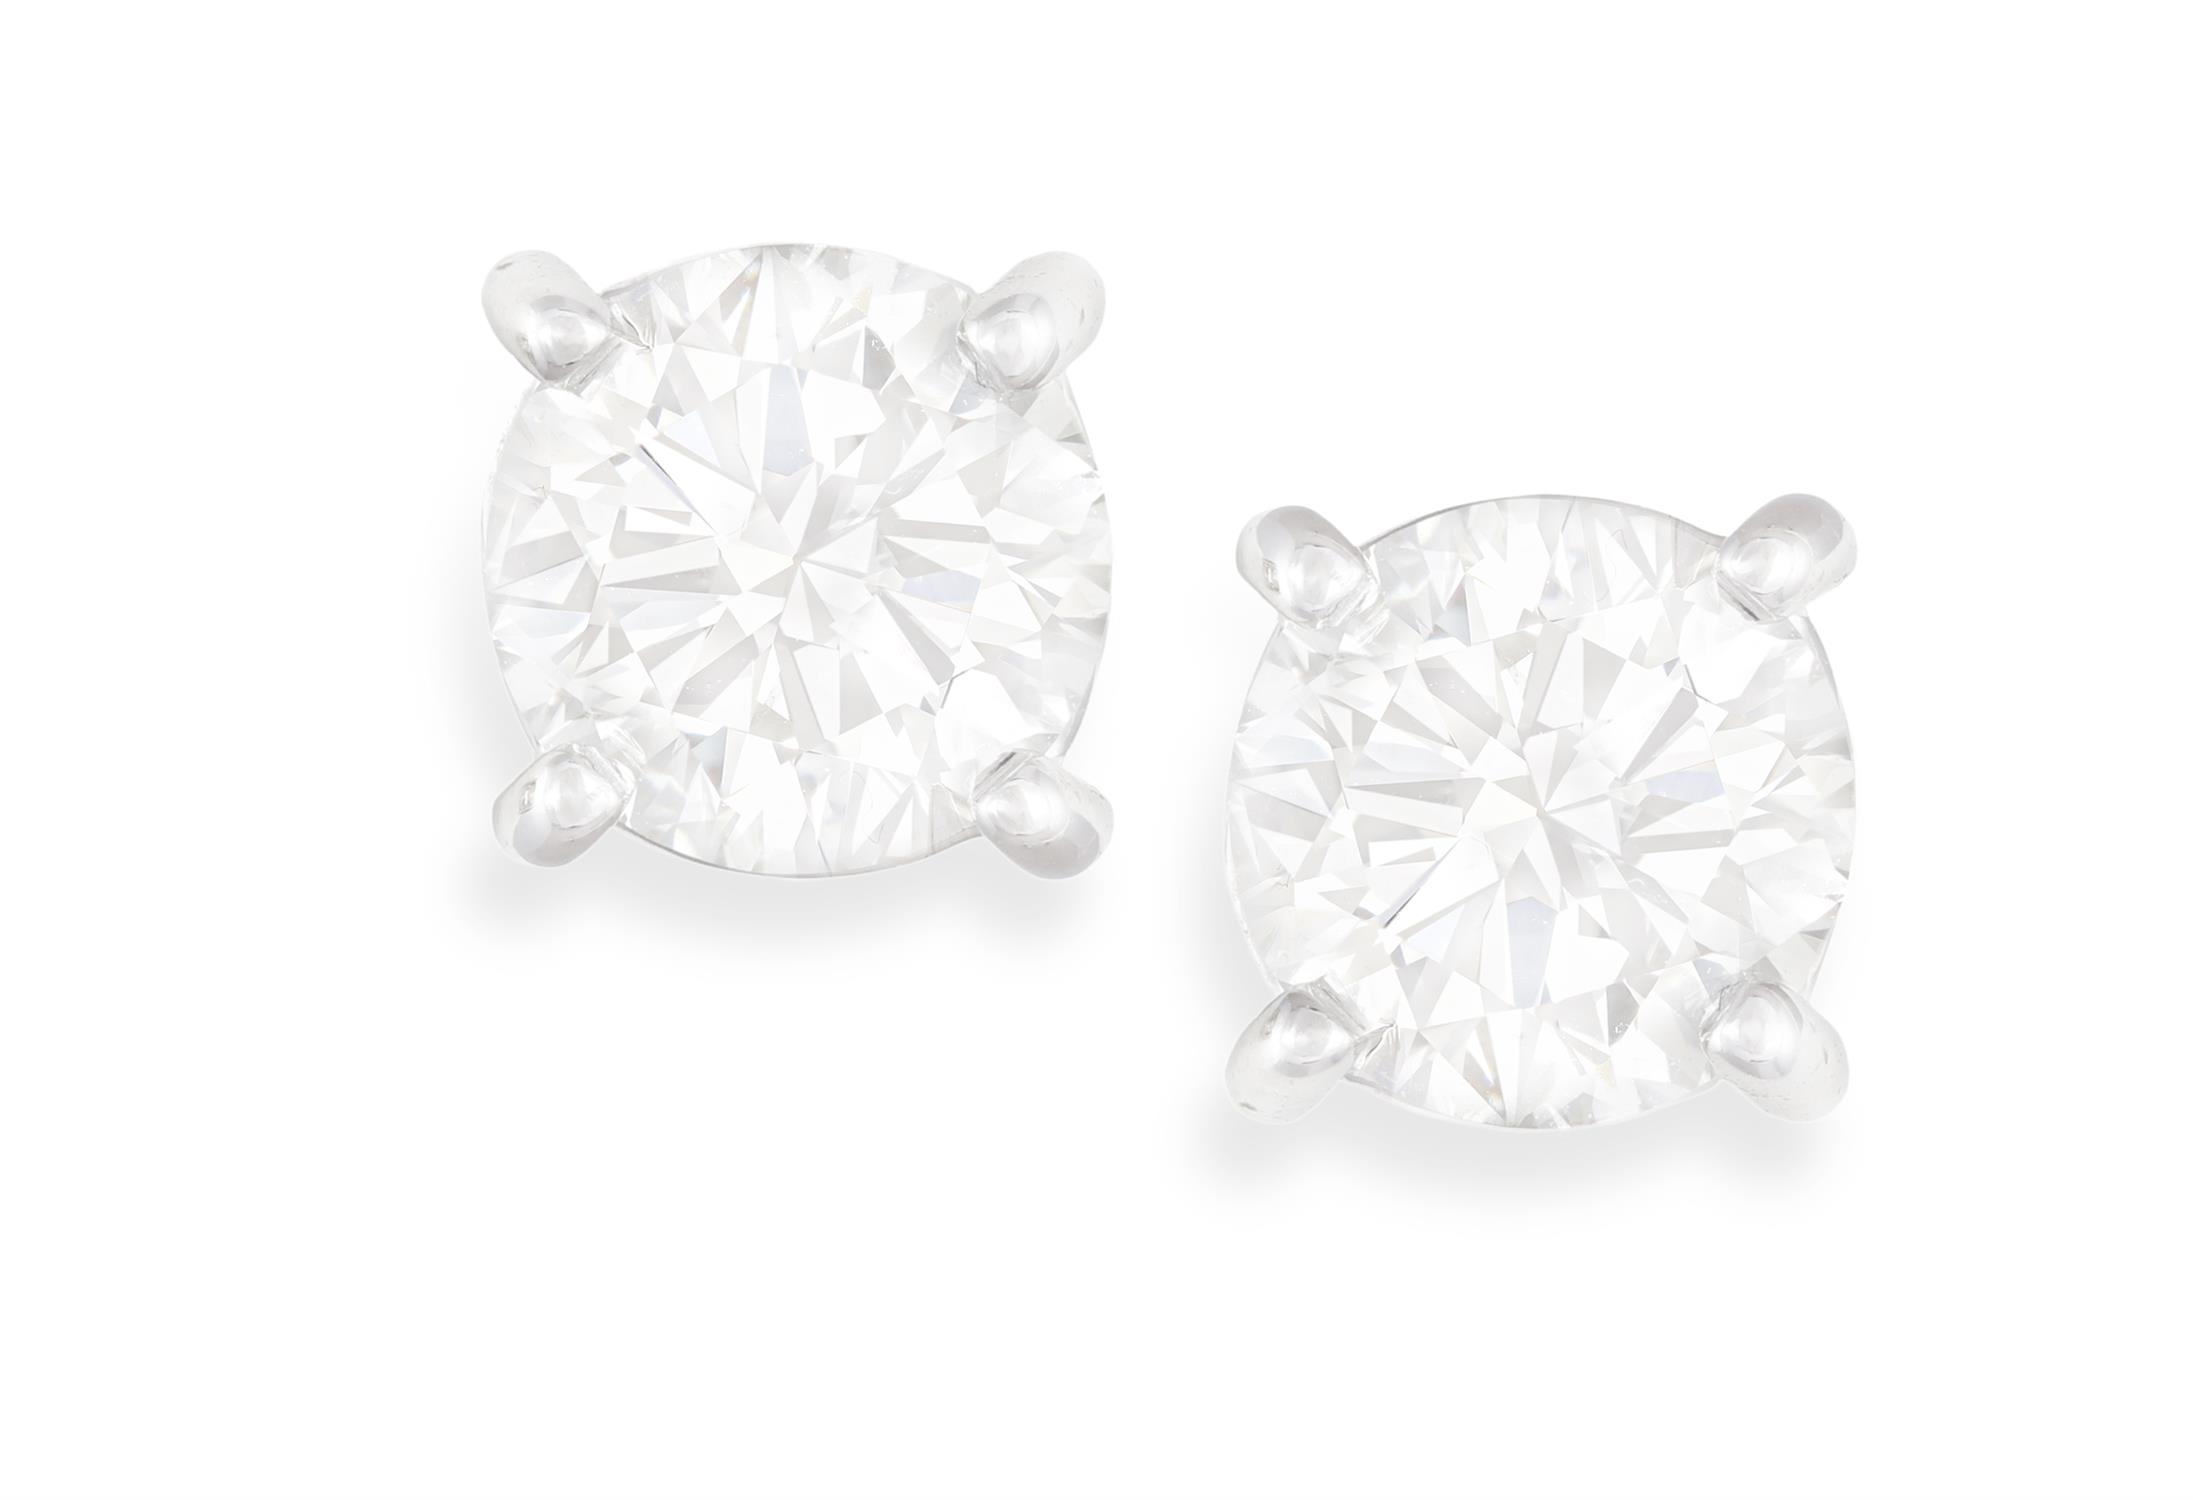 A PAIR OF DIAMOND EARSTUDS Each brilliant-cut diamond weighing approximately 0.